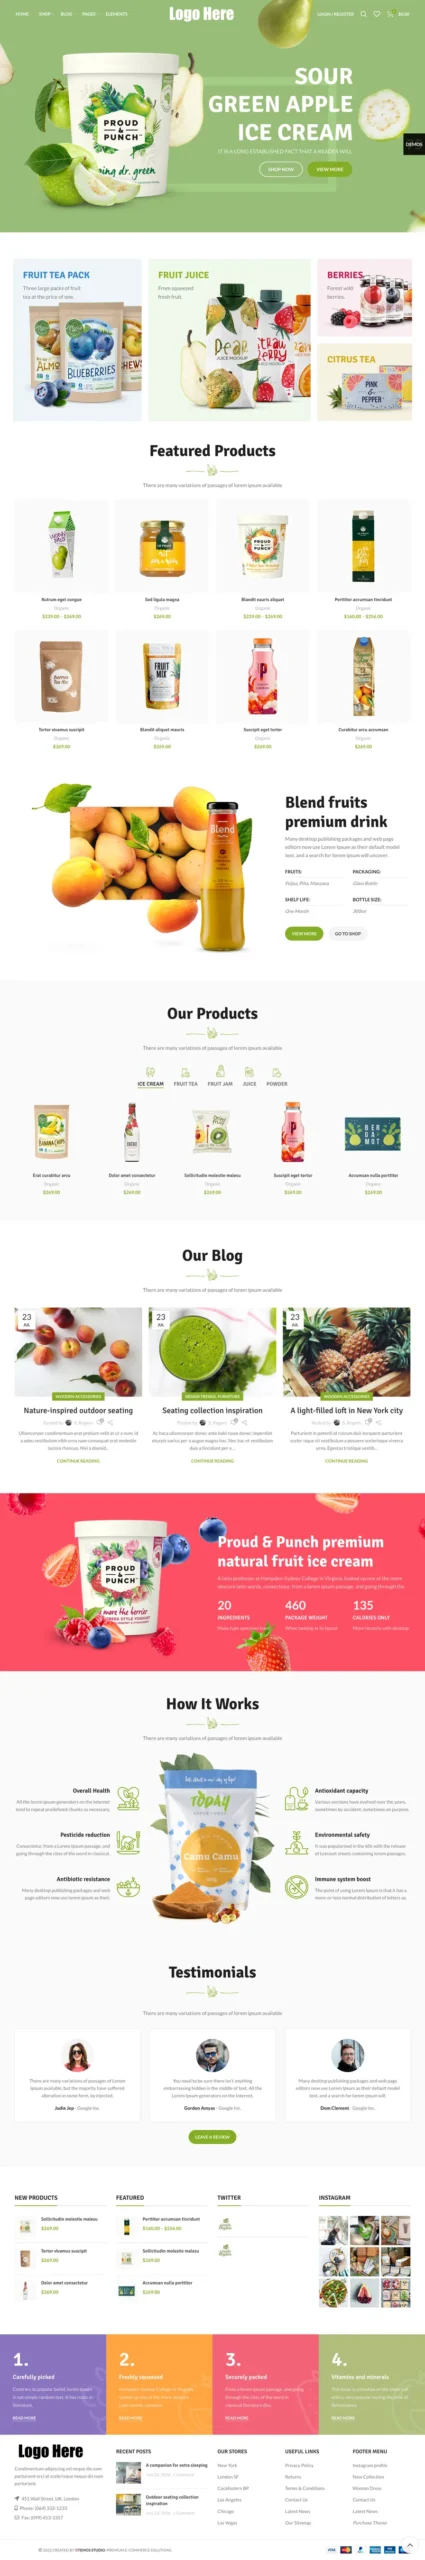 Organic Products Website Design Template